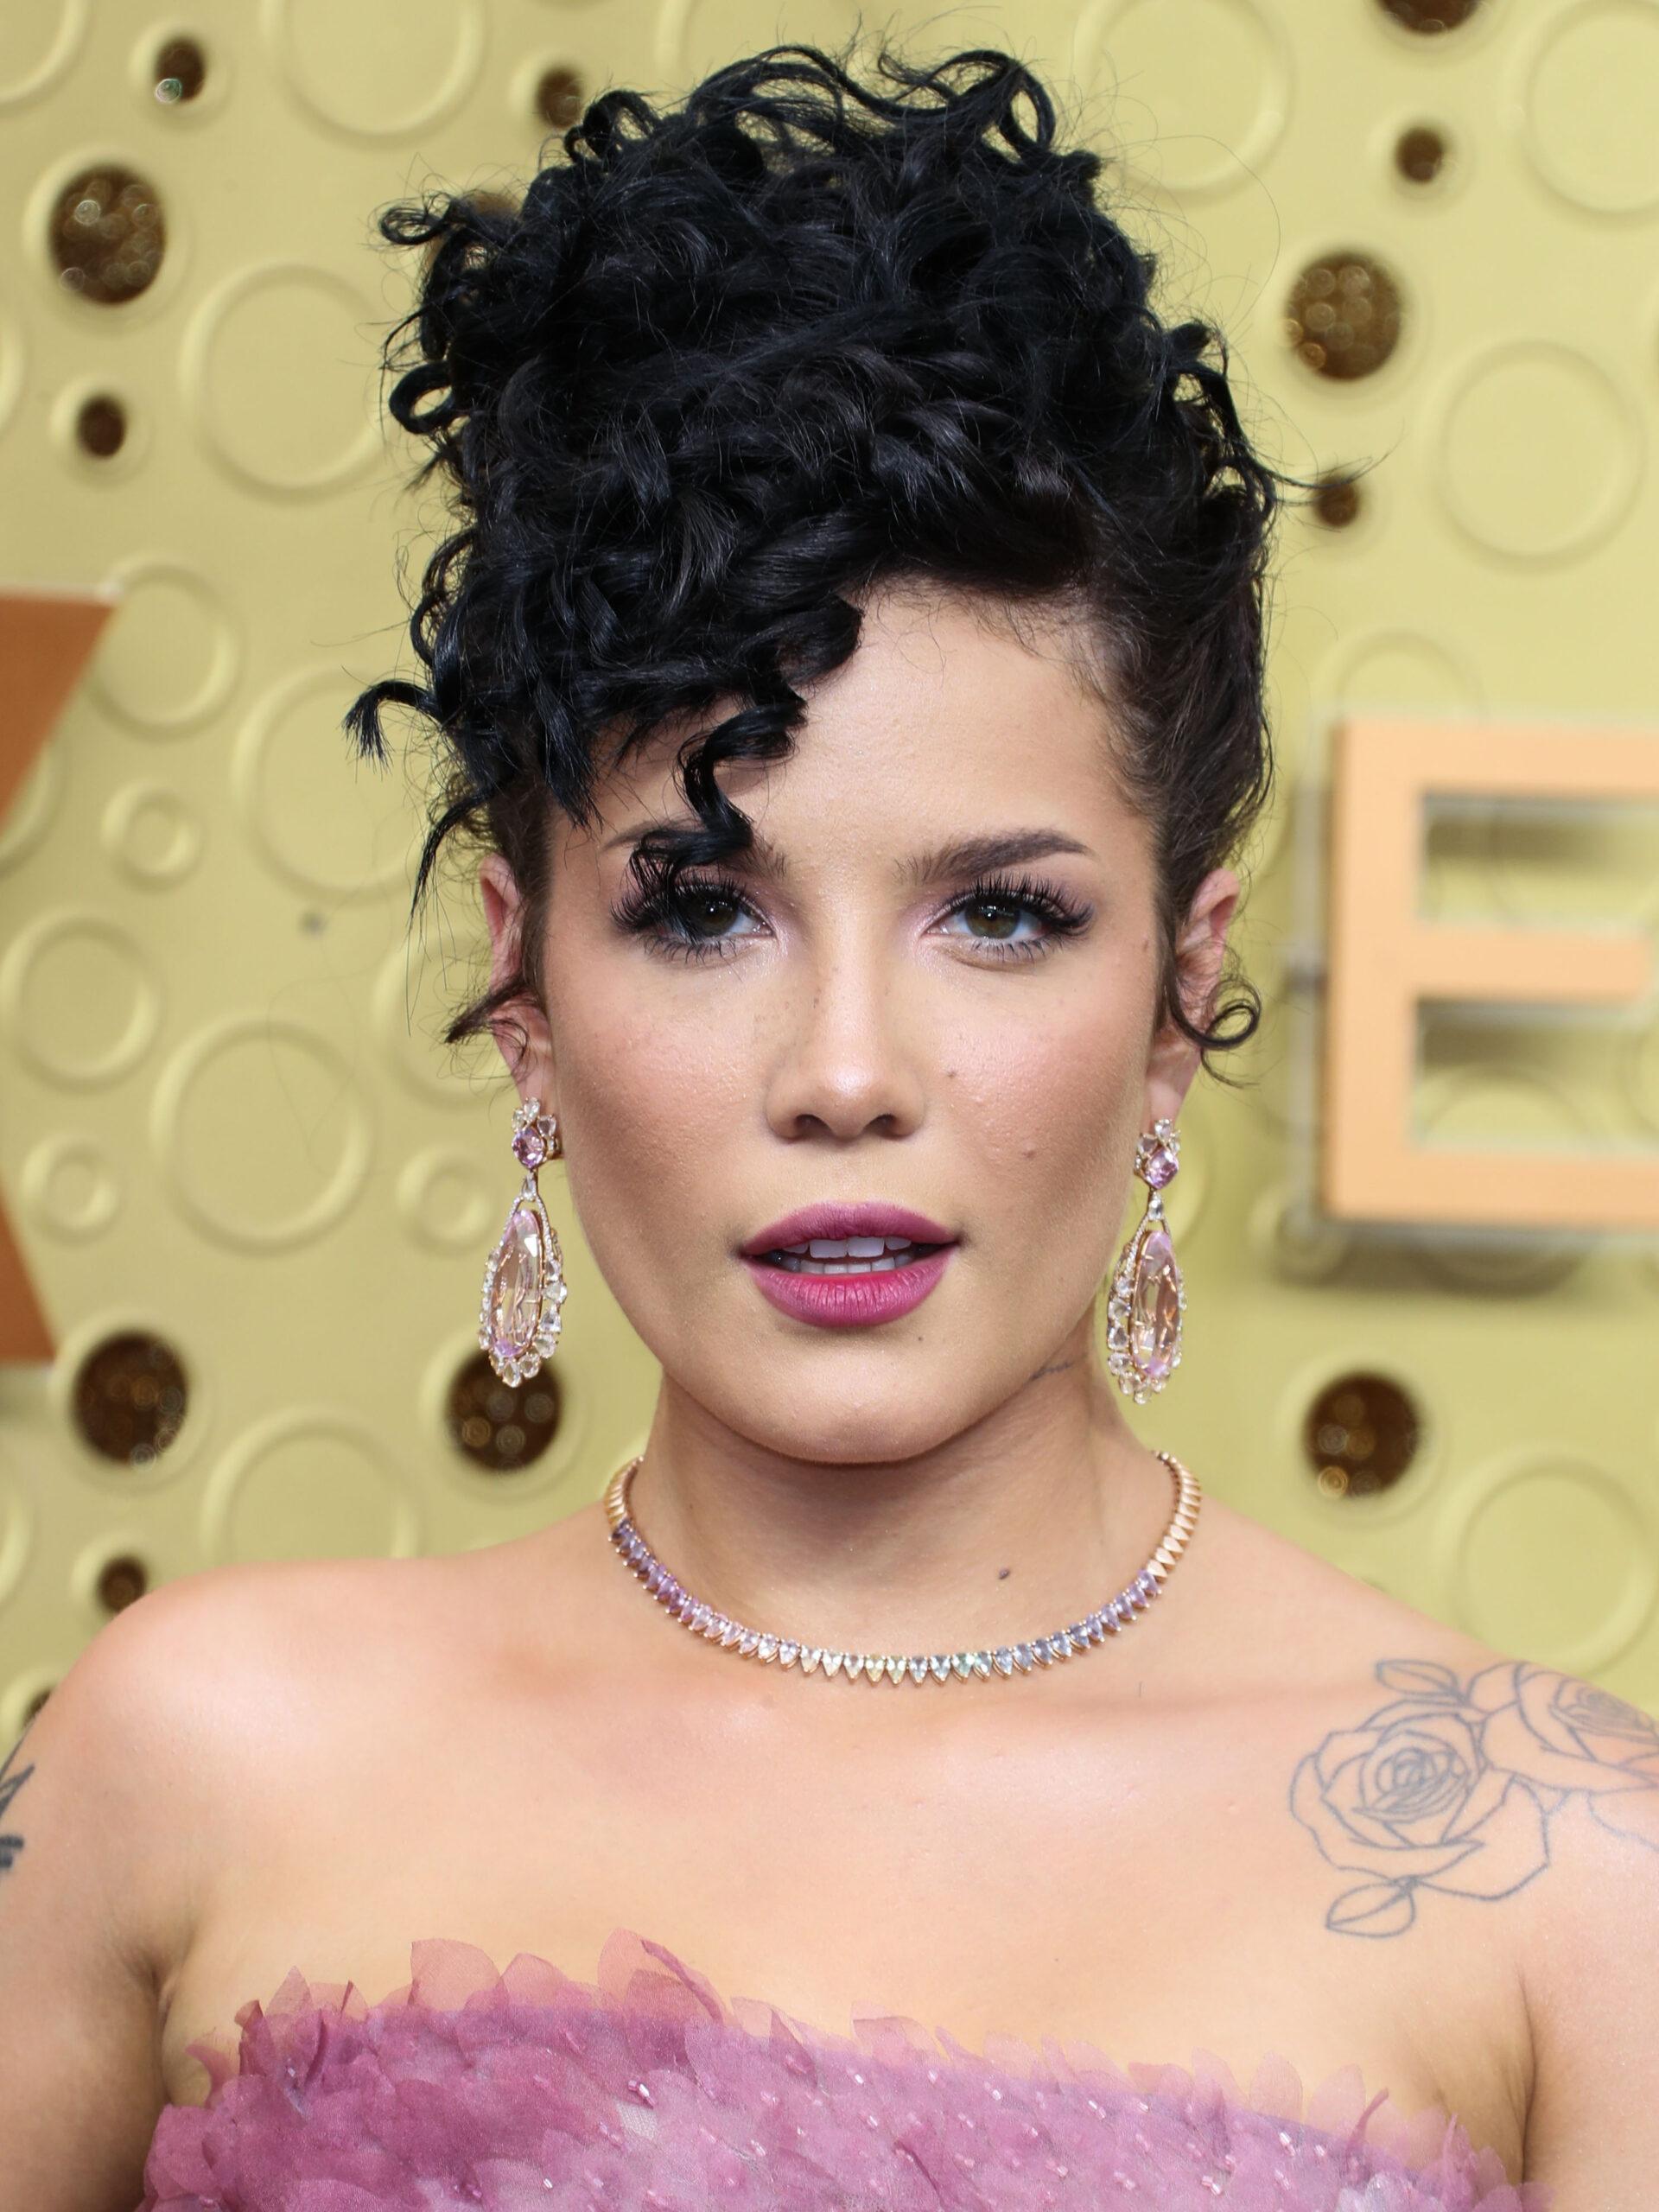 Halsey Sued By Nanny For 'Discrimination' After Allegedly Being 'Illegally' Fired